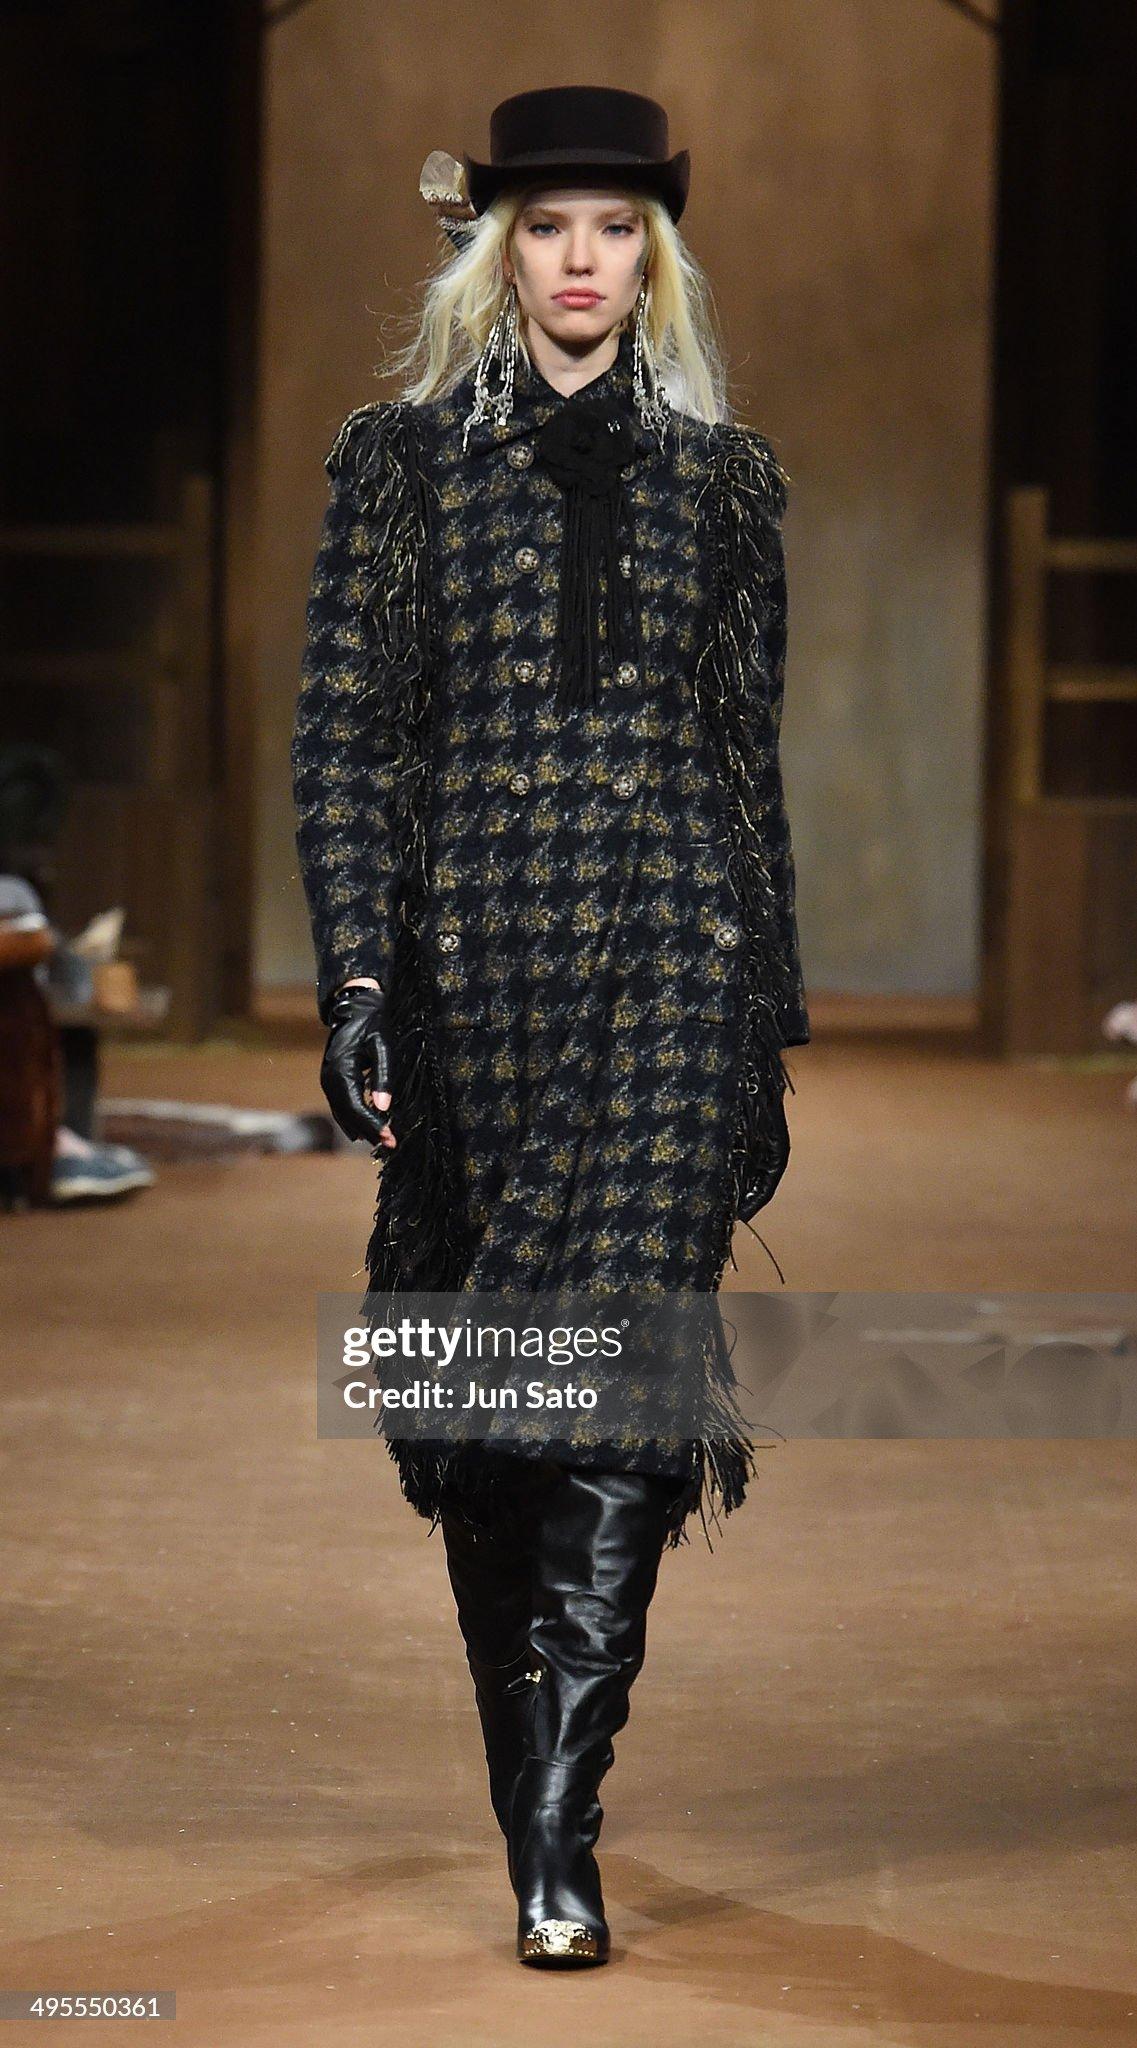 Extremely rare new Chanel black tweed coat with fringed accent from magnificent Collection Paris / DALLAS 2014 Pre-Fall Metiers d'Art by Karl Lagerfeld
Botique price over 14,000€!
Size mark 38 FR. Never worn.